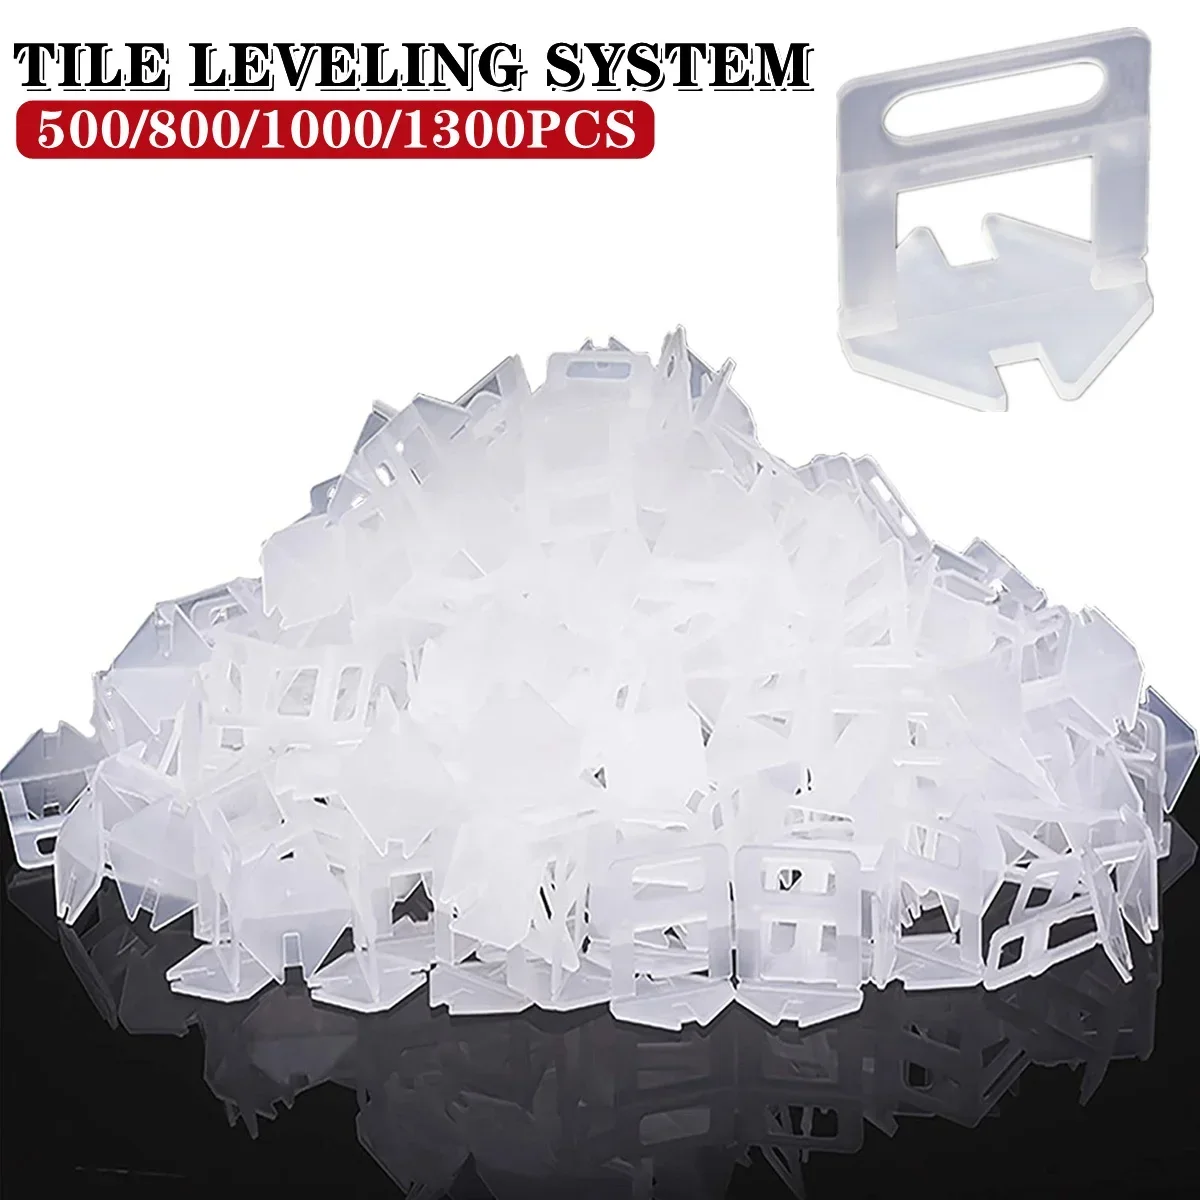 Tile Leveling System Clips 500-1300Pcs Tile Spacers 1MM-3MM for Ceramic Wall Tile Laying Construction Tools  Leveler Spacers 50 30 20pcs construction tools tile leveler adjuster plastic position artifacts leveler locator spacers for flooring wall tile